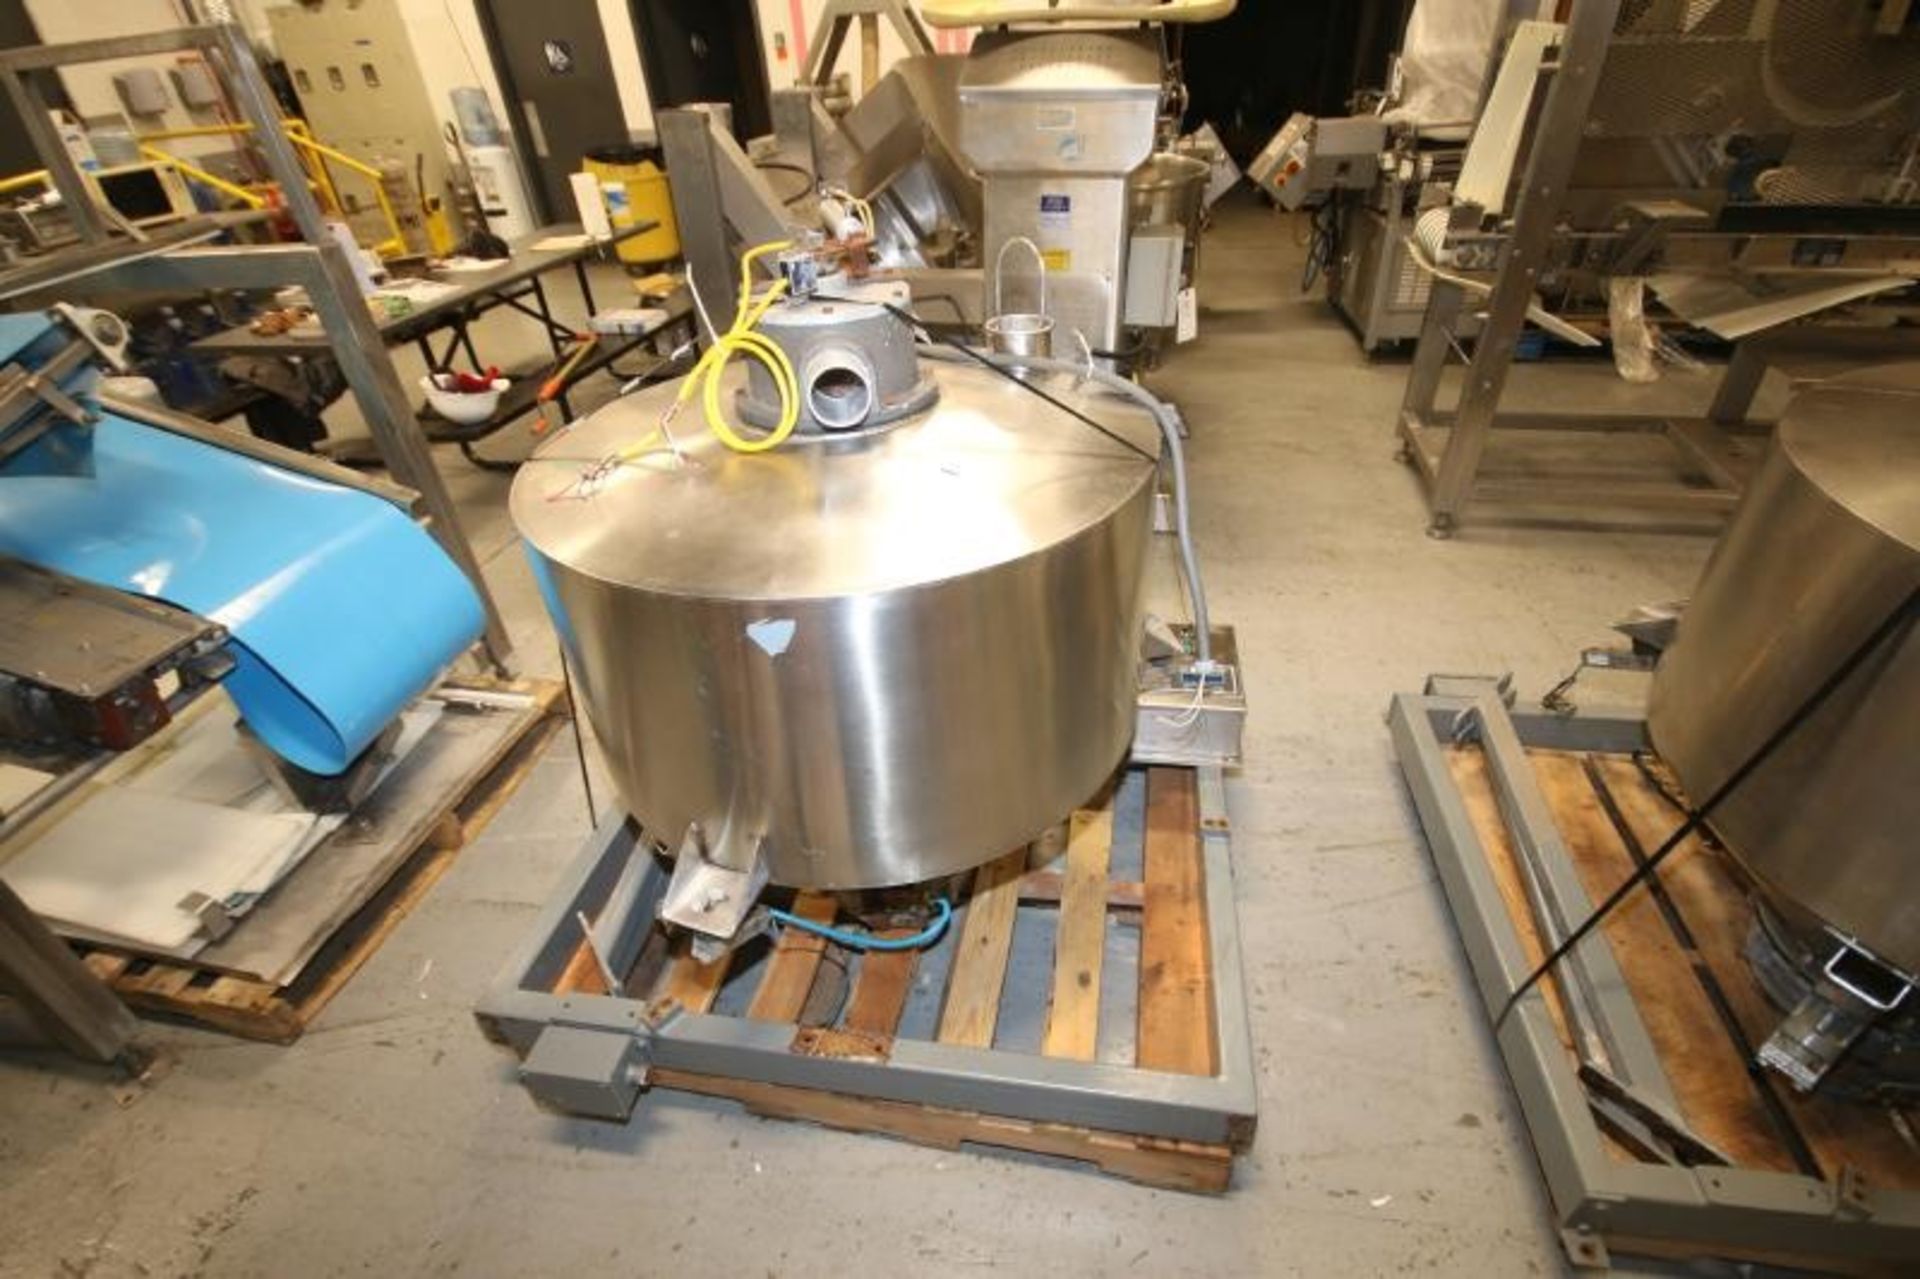 36"W x 32"H Cone Bottom S/S Powder Hopper, with Load Cells, Pneumatic Top & Bottom Valve with - Image 2 of 3